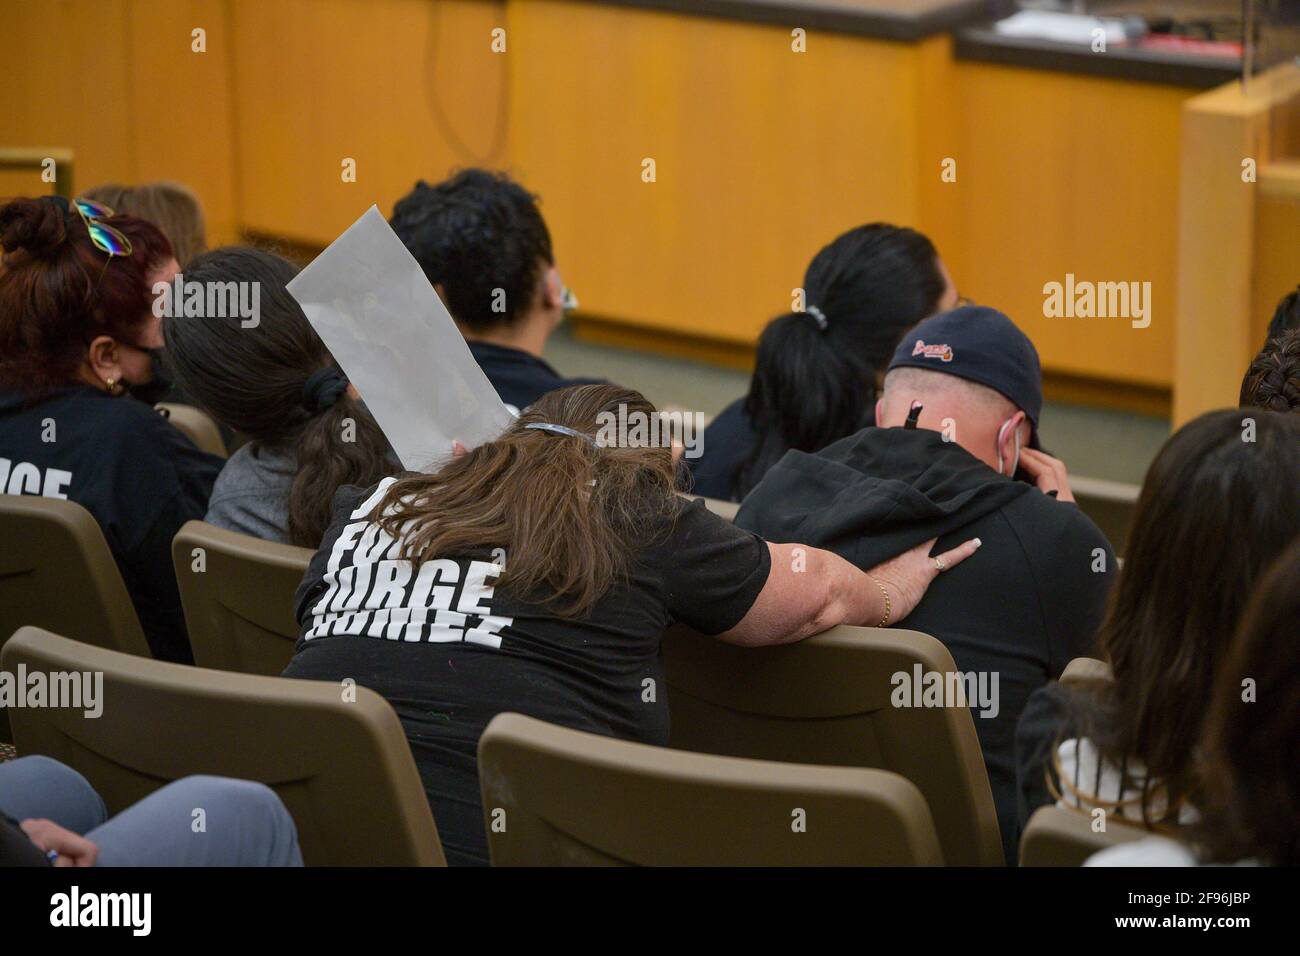 Las Vegas NV, USA. 16th Apr, 2021. Family of Jorge Gomez at the fact finding review about his police shooting death in Las Vegas, NV on April 16, 2021. Credit: Dee Cee Carter/Media Punch/Alamy Live News Stock Photo